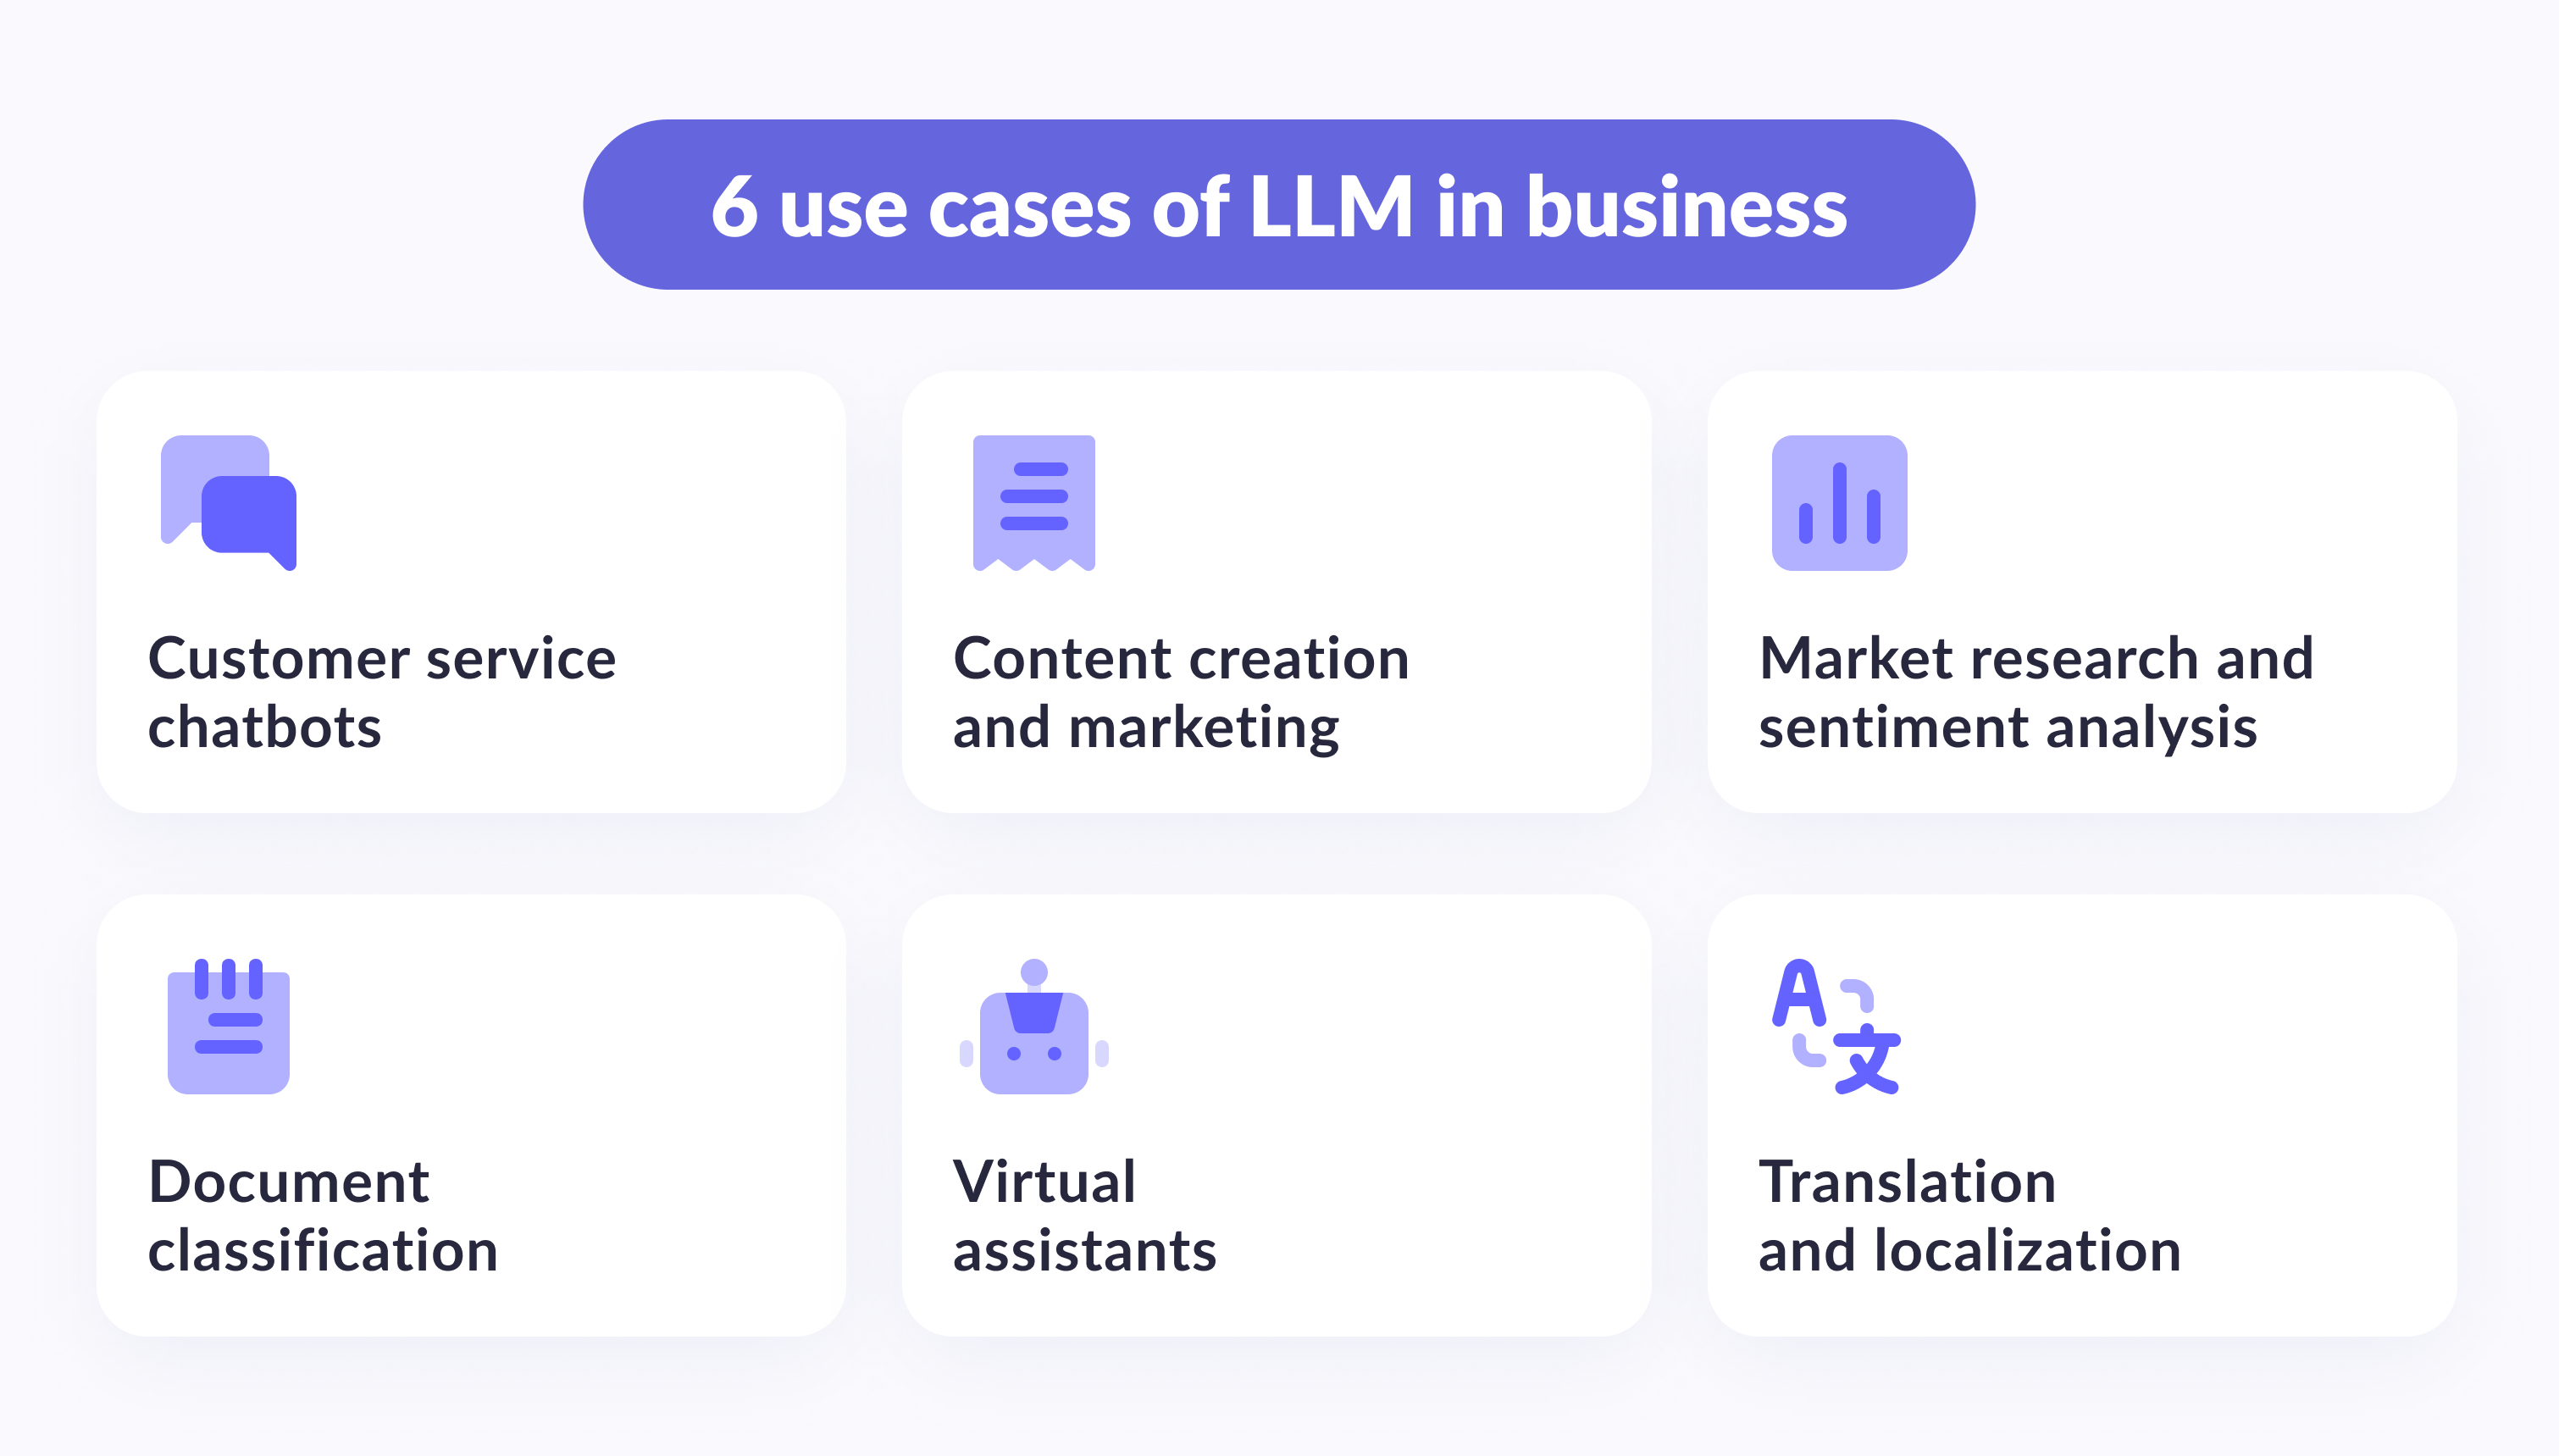 6 use cases of LLM in business